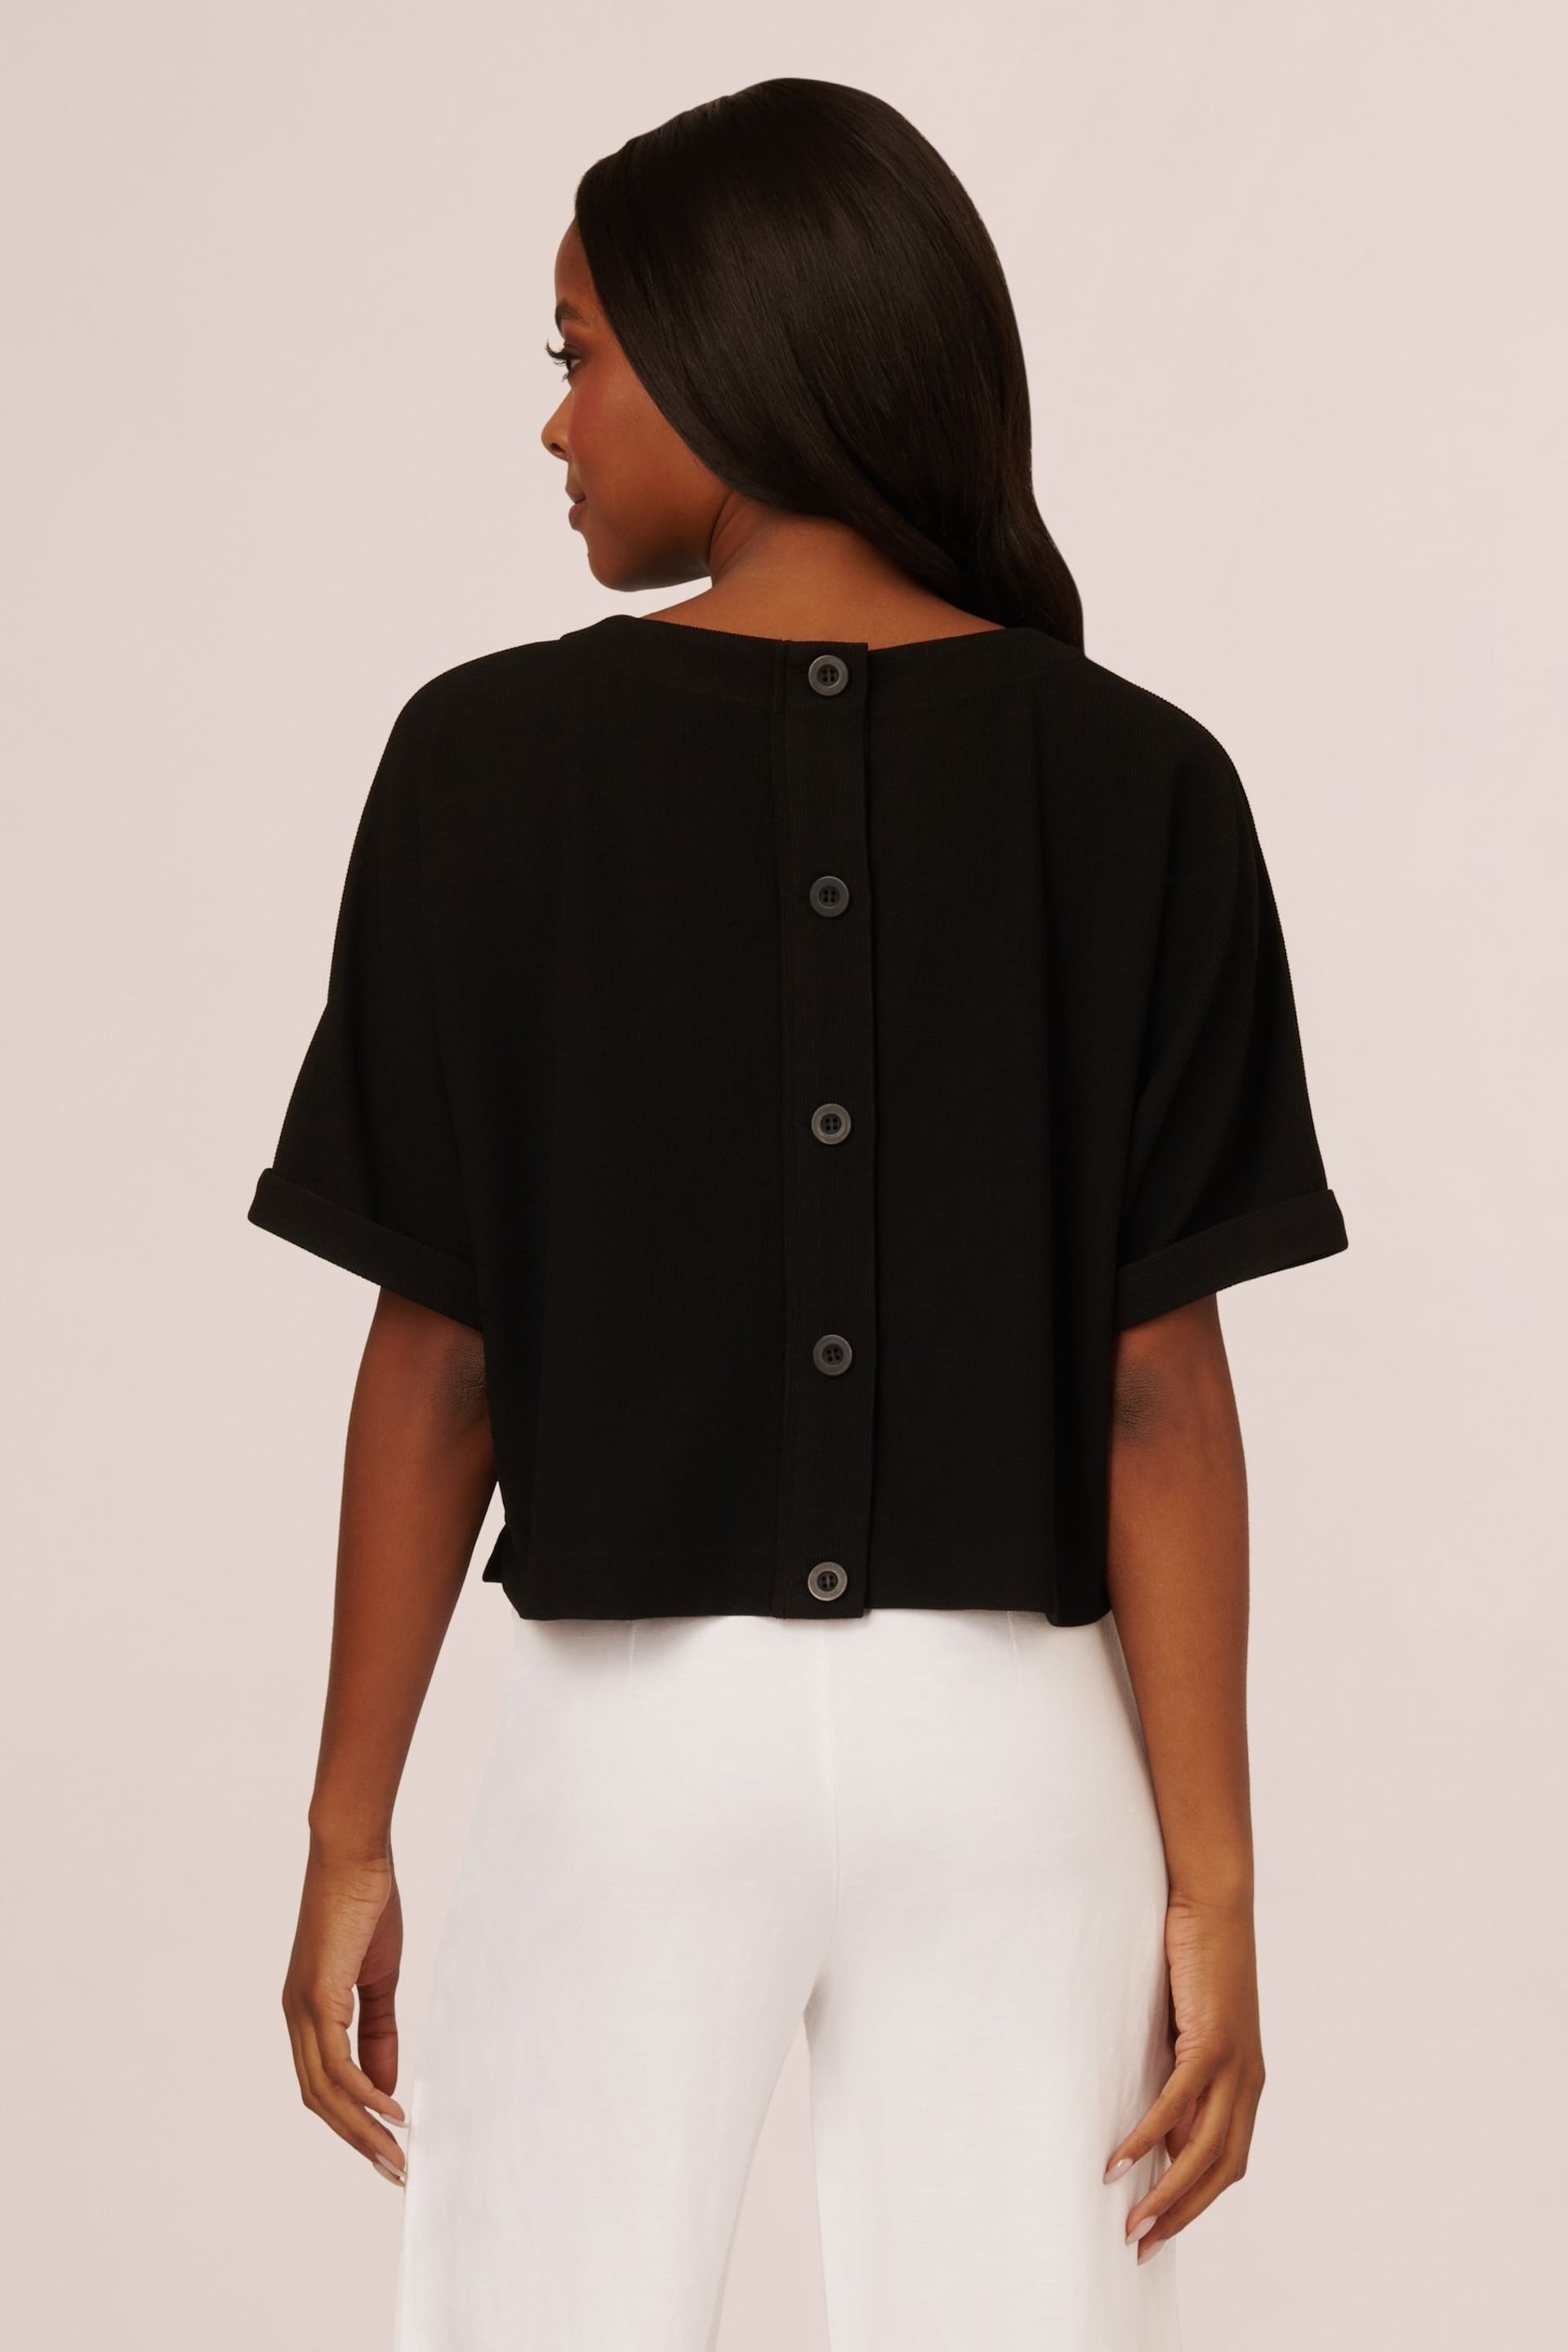 Adrianna Papell Mini Rib Crop Button Back Knit Black Top - Image 2 of 6